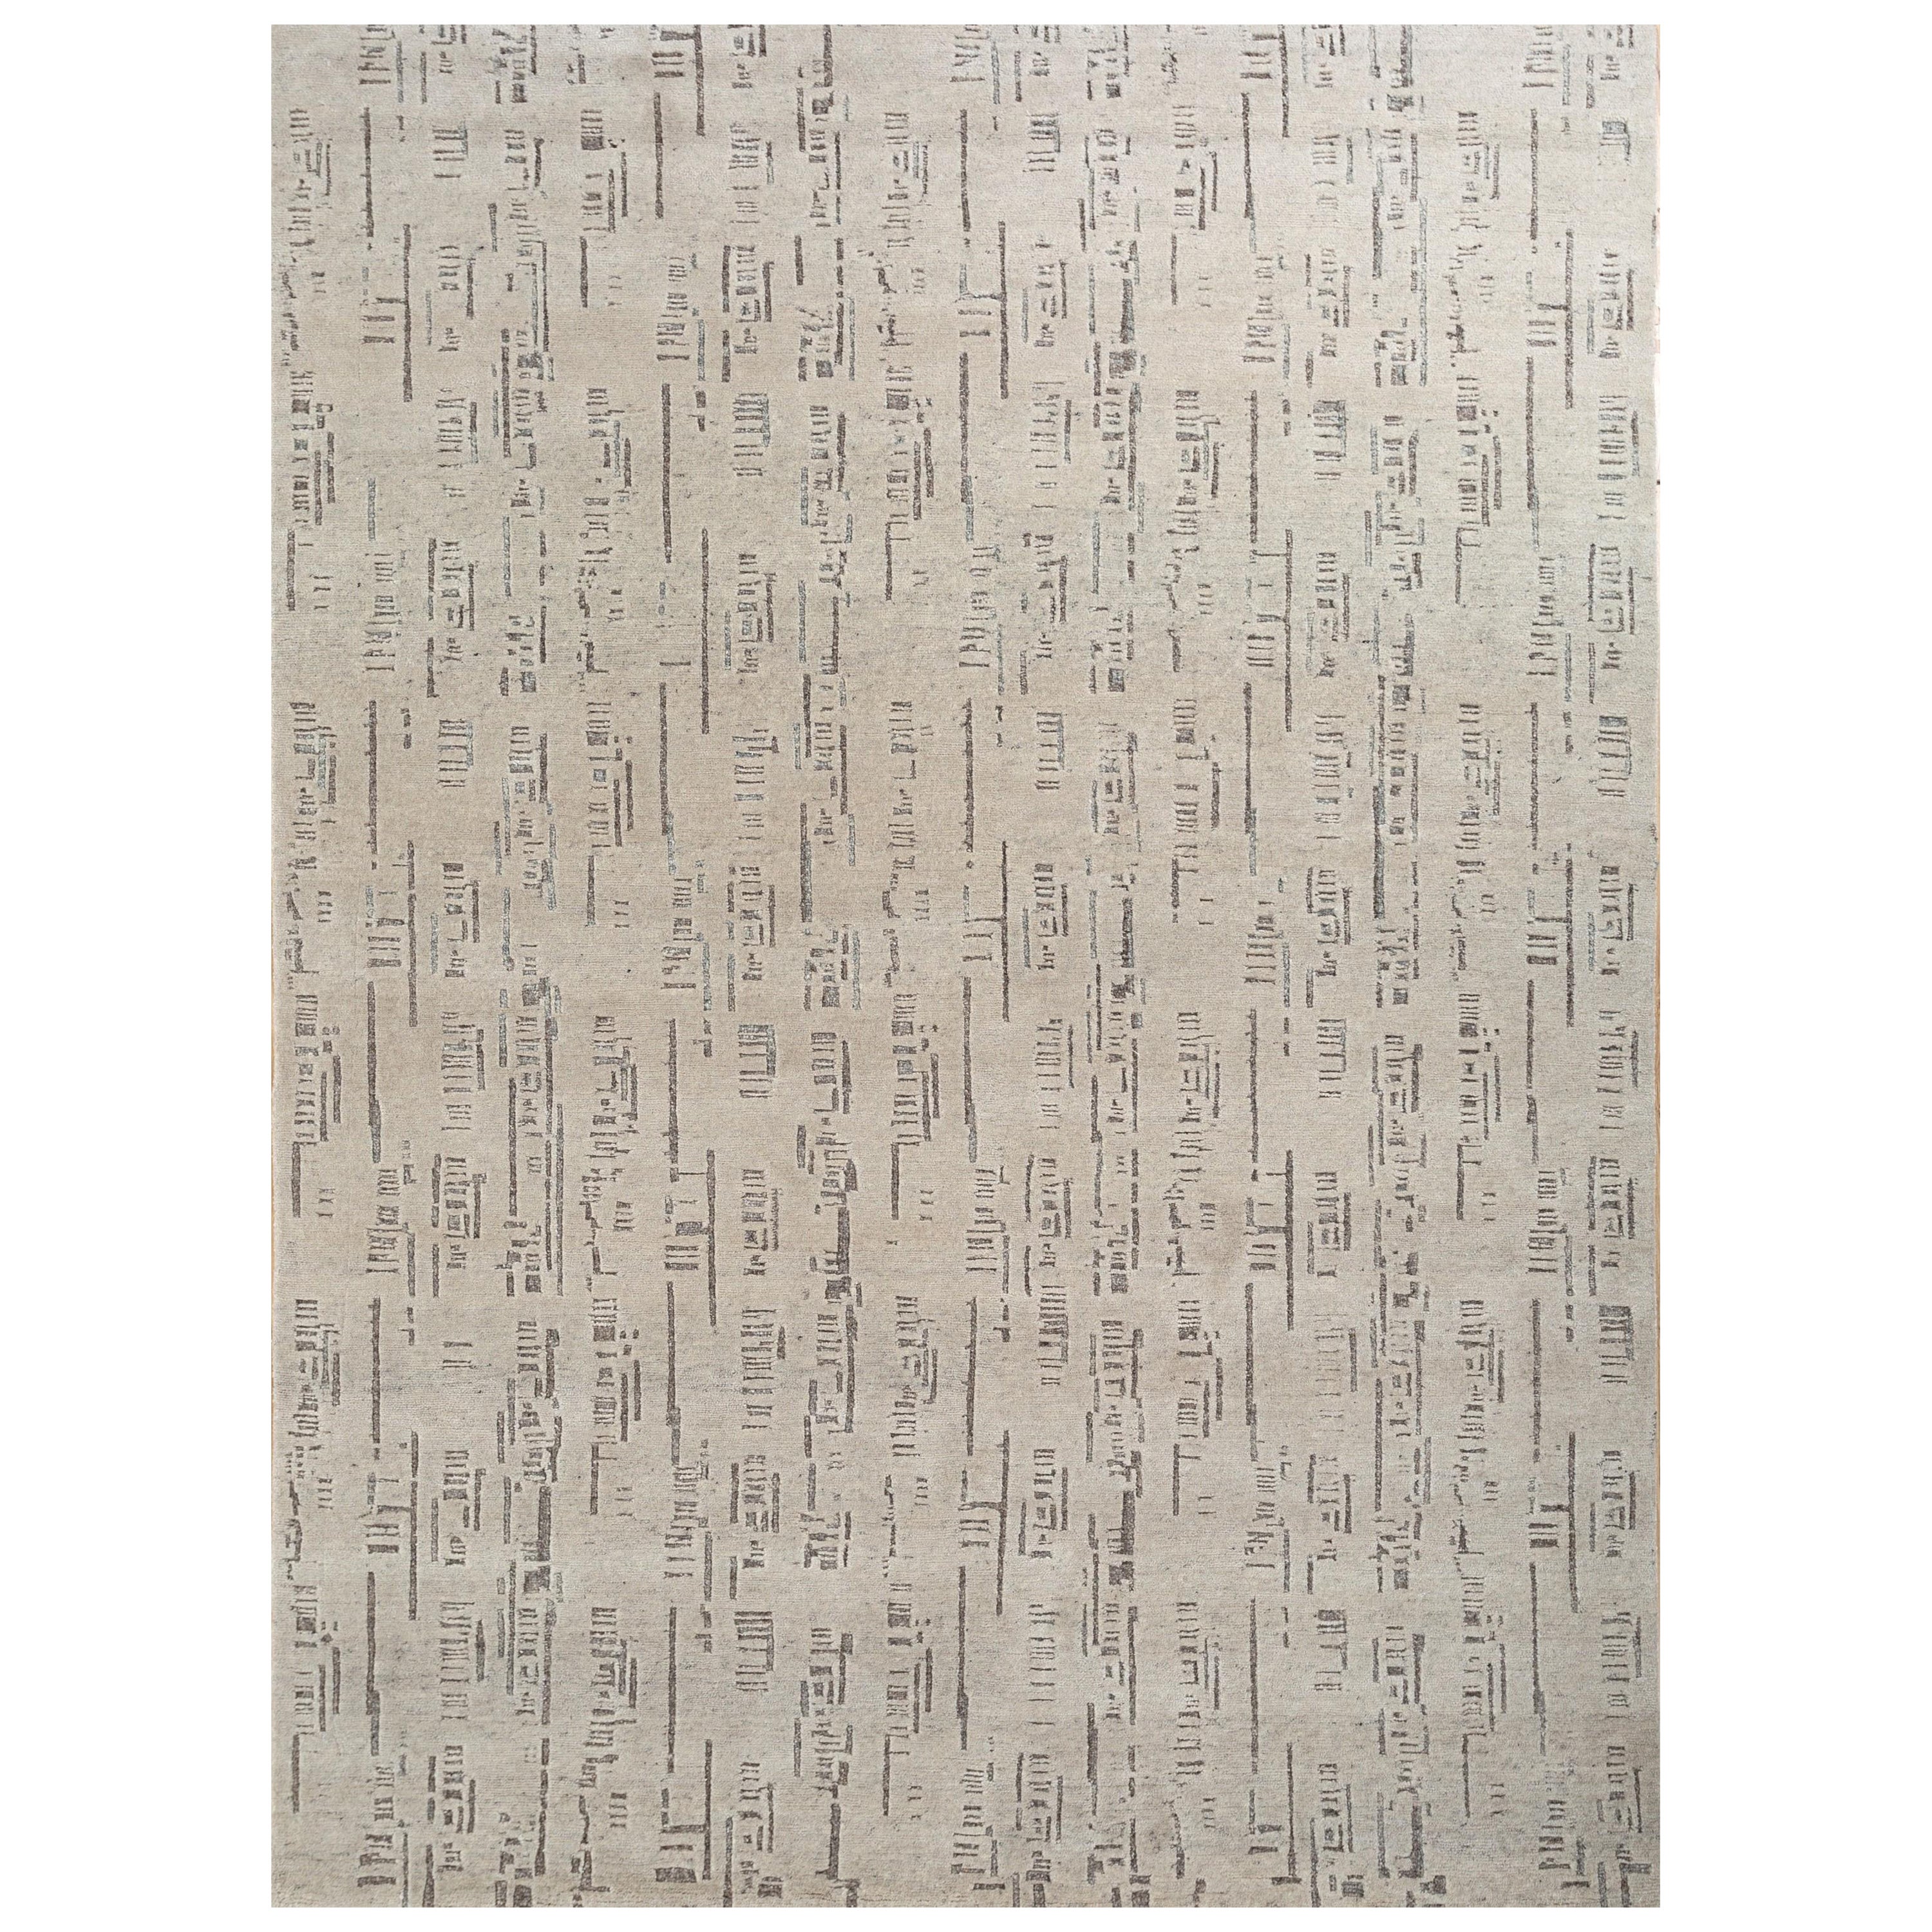 Majestic Marrakech Essence Marble & Natural Soot 180X270 cm Handknotted Rug For Sale